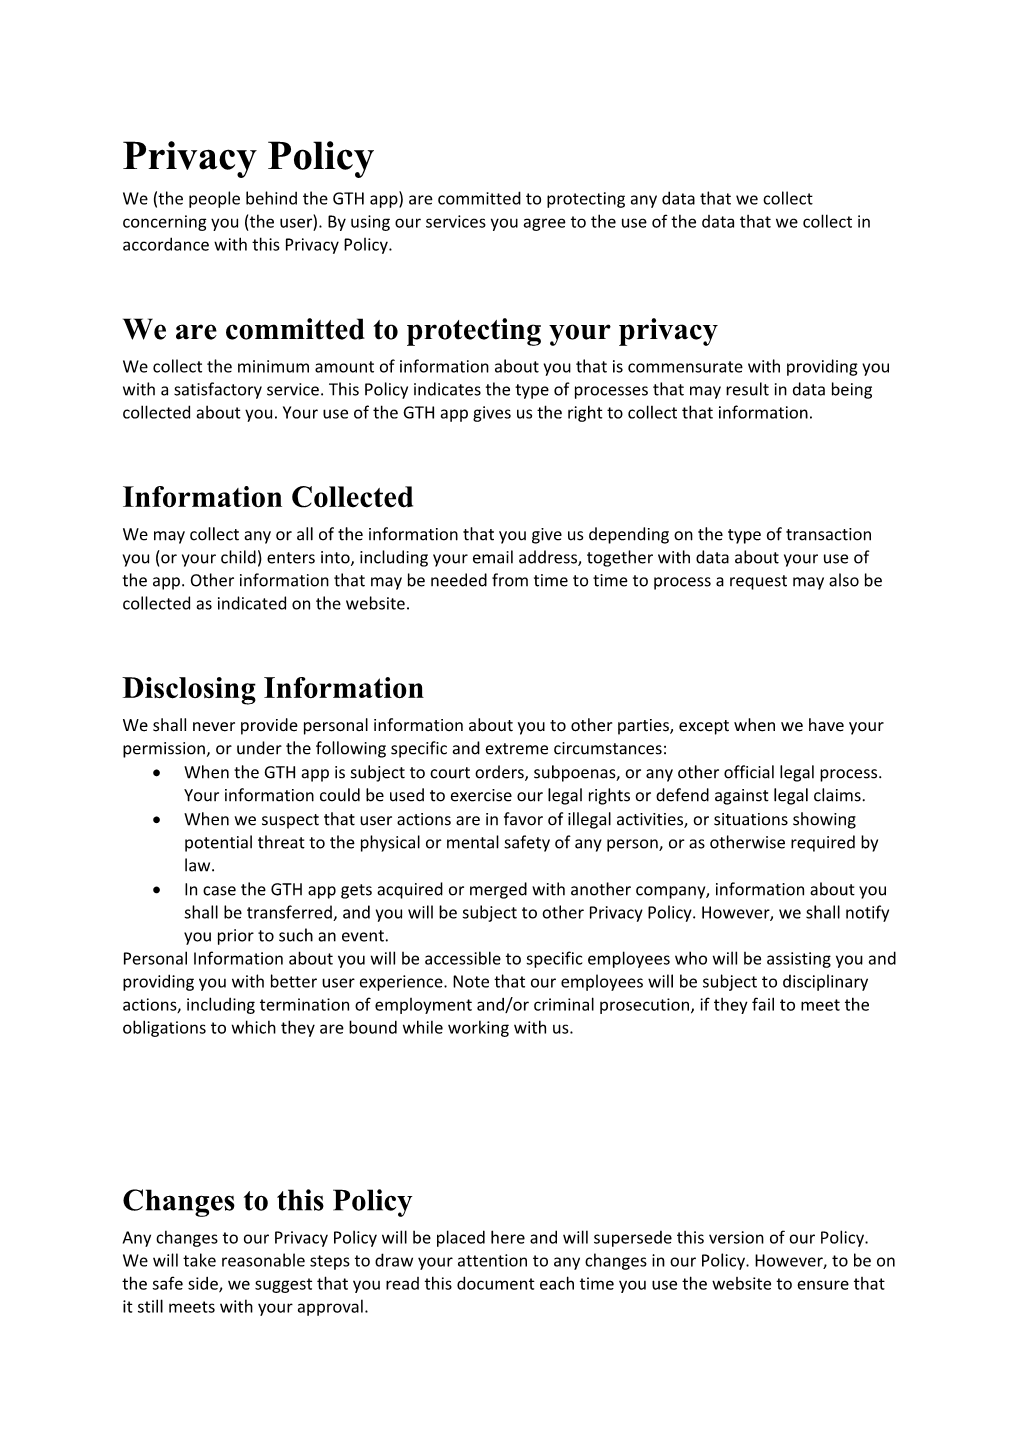 We Are Committed to Protecting Your Privacy